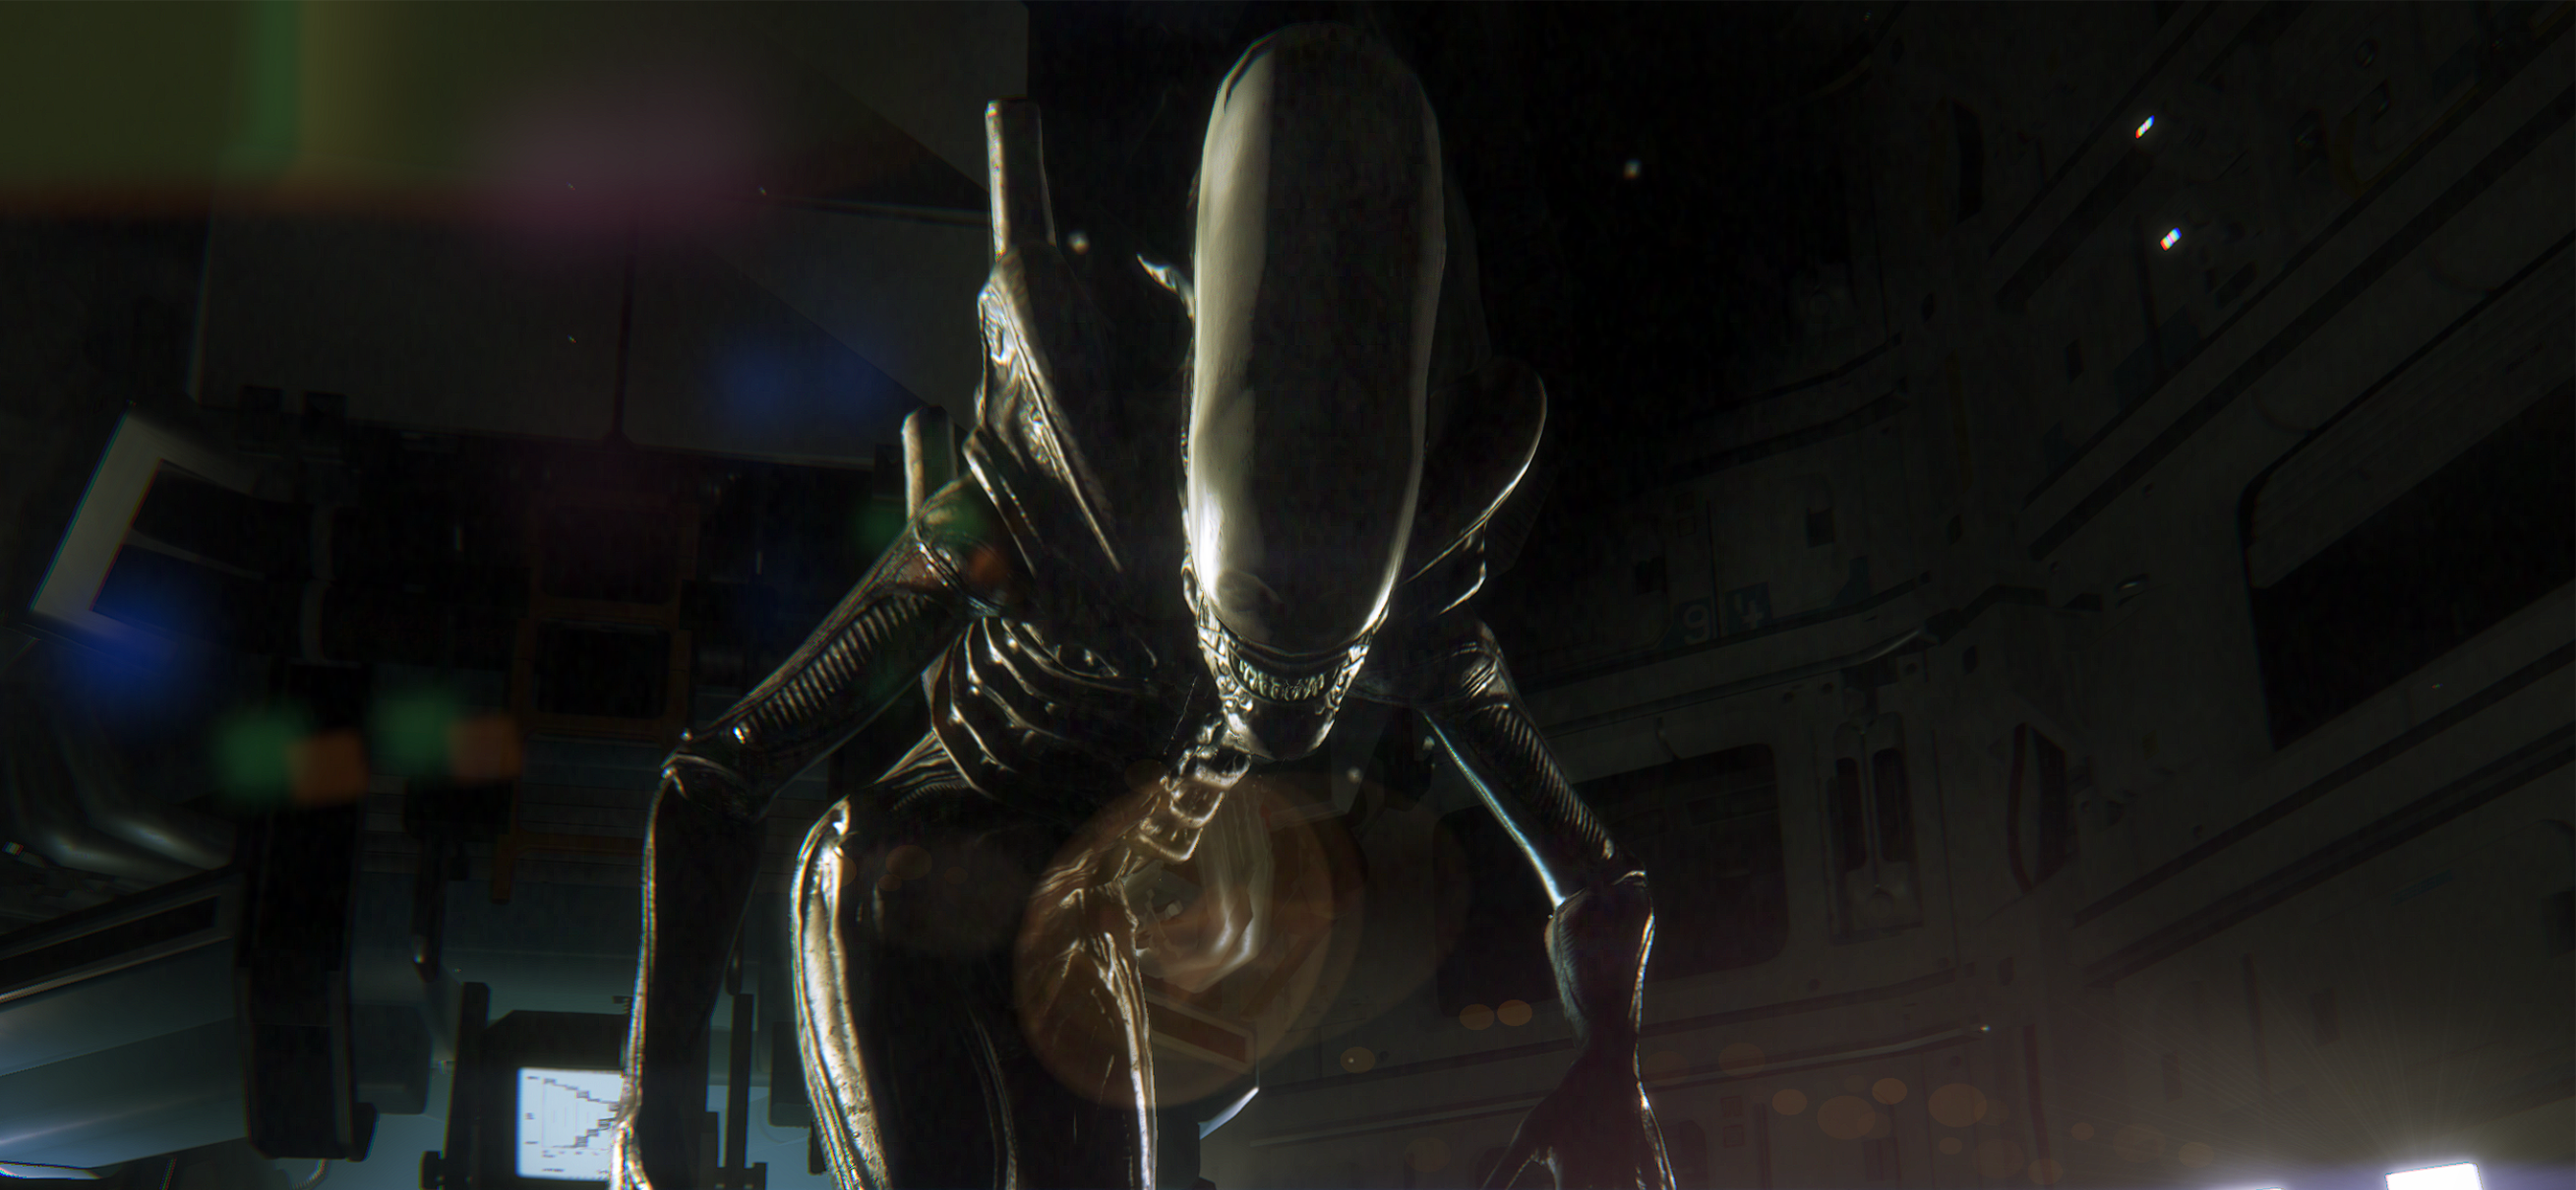 ‘Alien: Isolation’ From Creative Assembly Is Coming To IOS And Android Through Feral Interactive Next Month With All DLC Included, Pre-Orders Now Live thumbnail